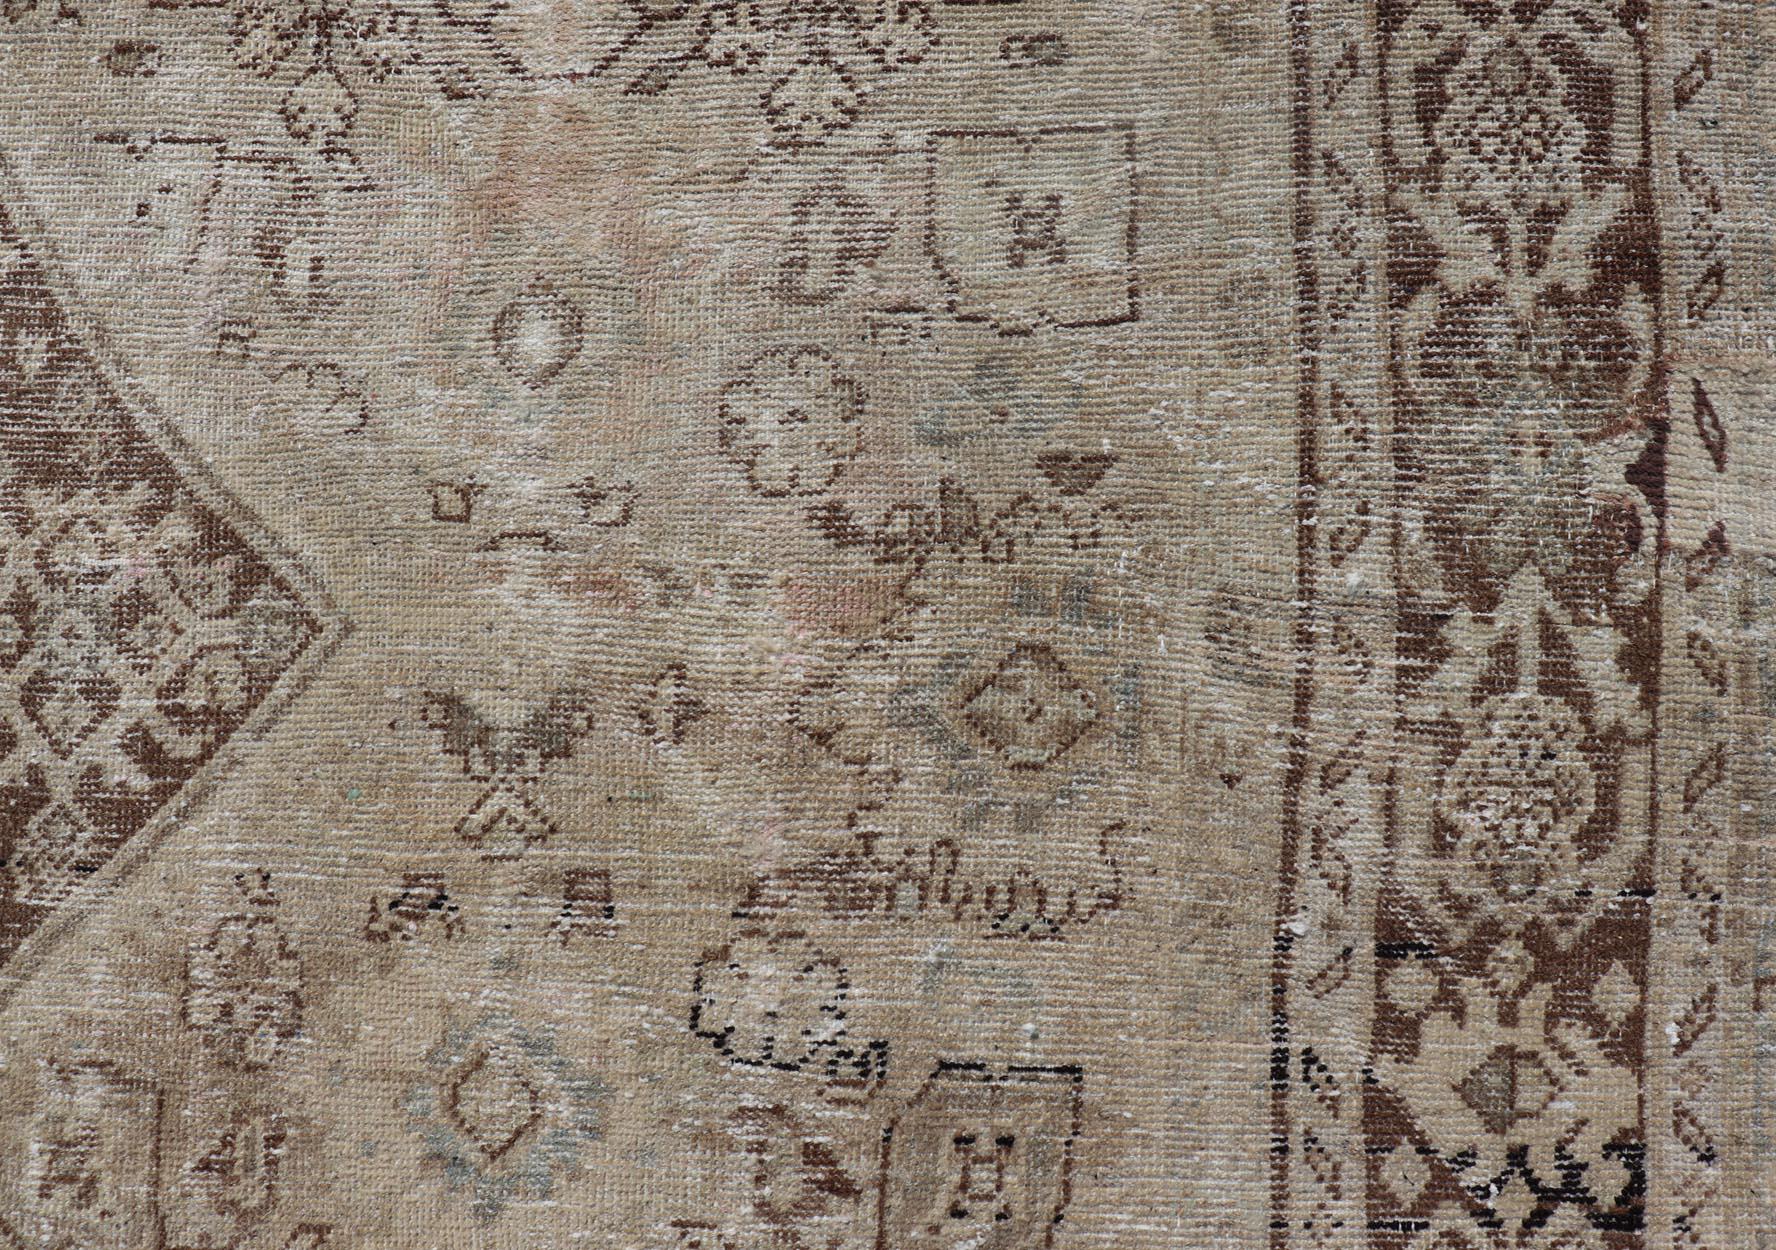 Measures: 9'10 x 13'8 

This antique Persian rug features an all-neutral palette of creams, taupe, and cocoas. The field homes a floral medallion and diamond casings. The corners of the field are brown. The cornices continue the design, beside the